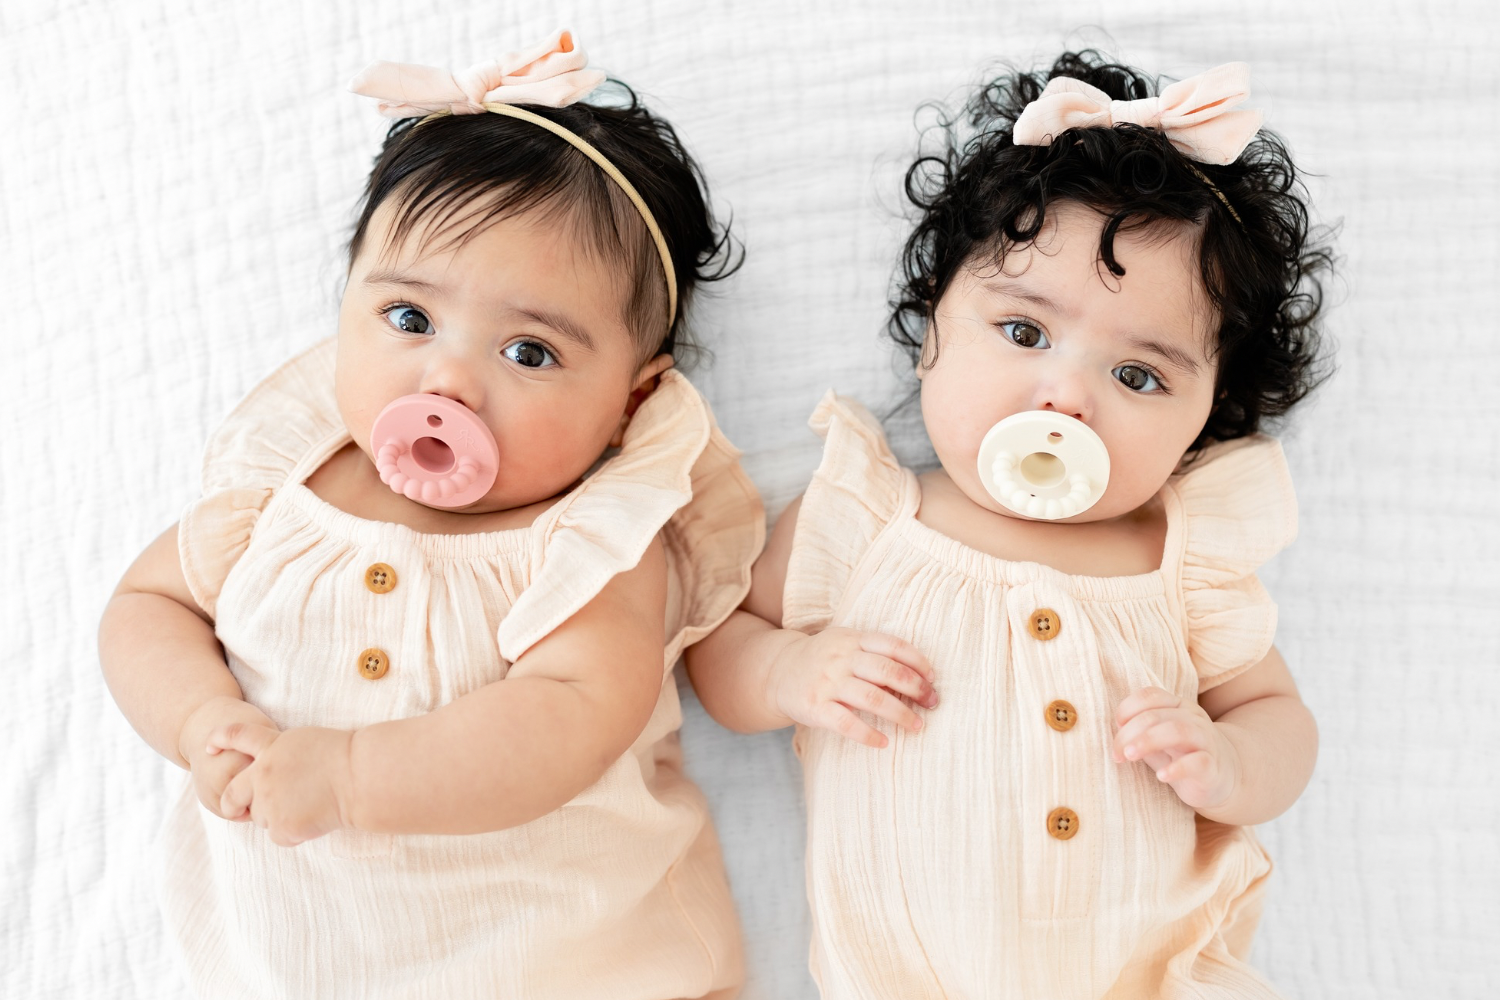 Baby girls with pacifiers